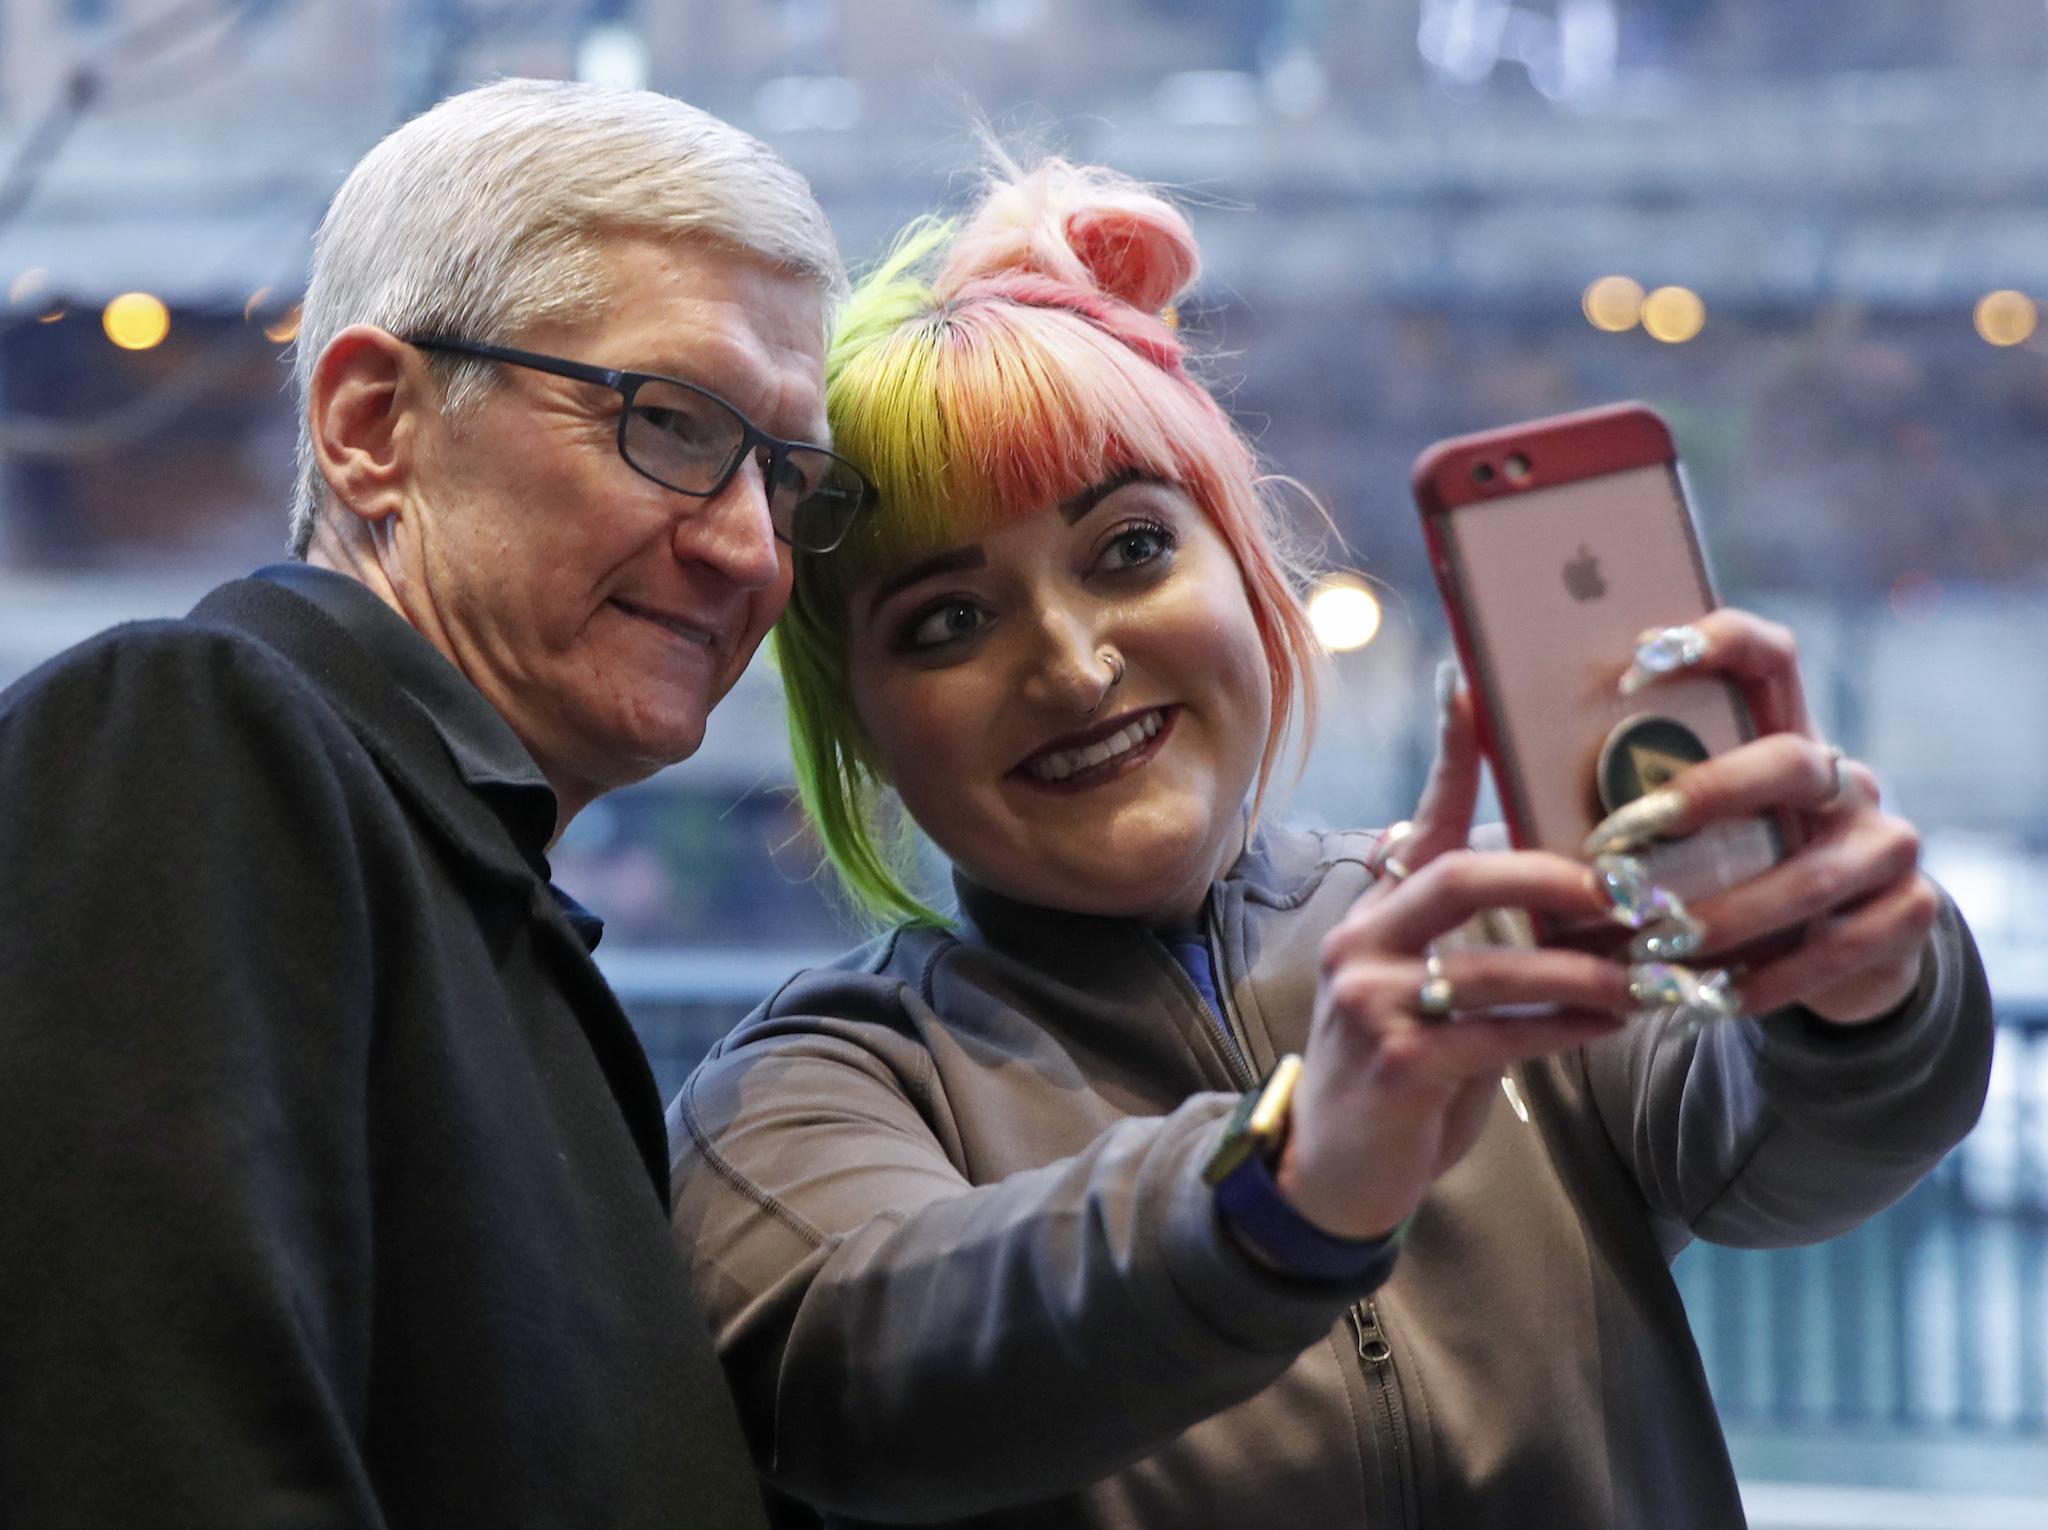 Apple CEO Tim Cook poses for a selfie as he visits an Apple store in Chicago, March 27, 2018